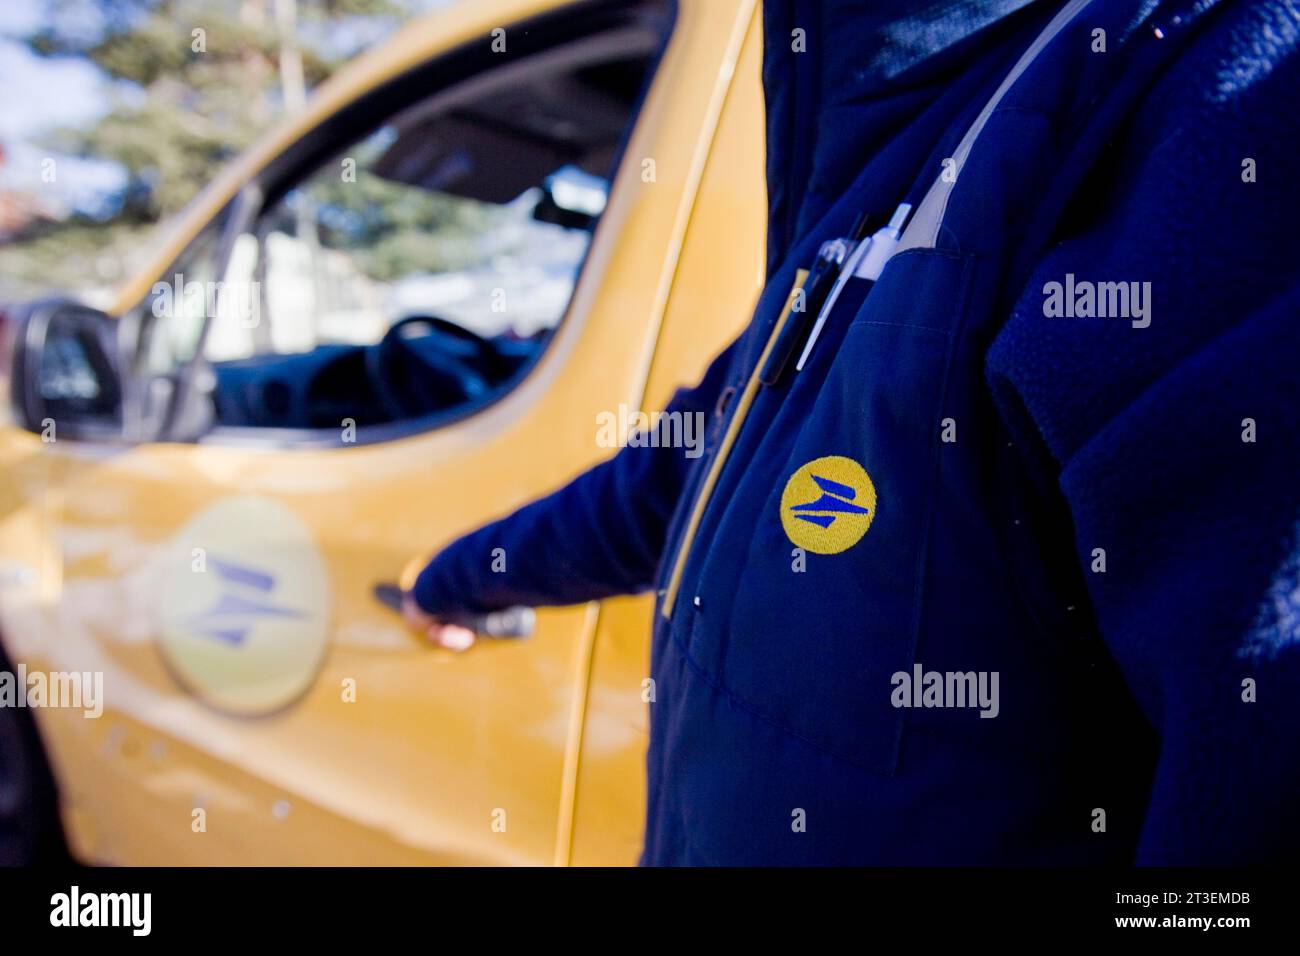 Close-up shot of the logo of La Poste, mail service of France, on the jacket of a mailman in front of his vehicle Stock Photo